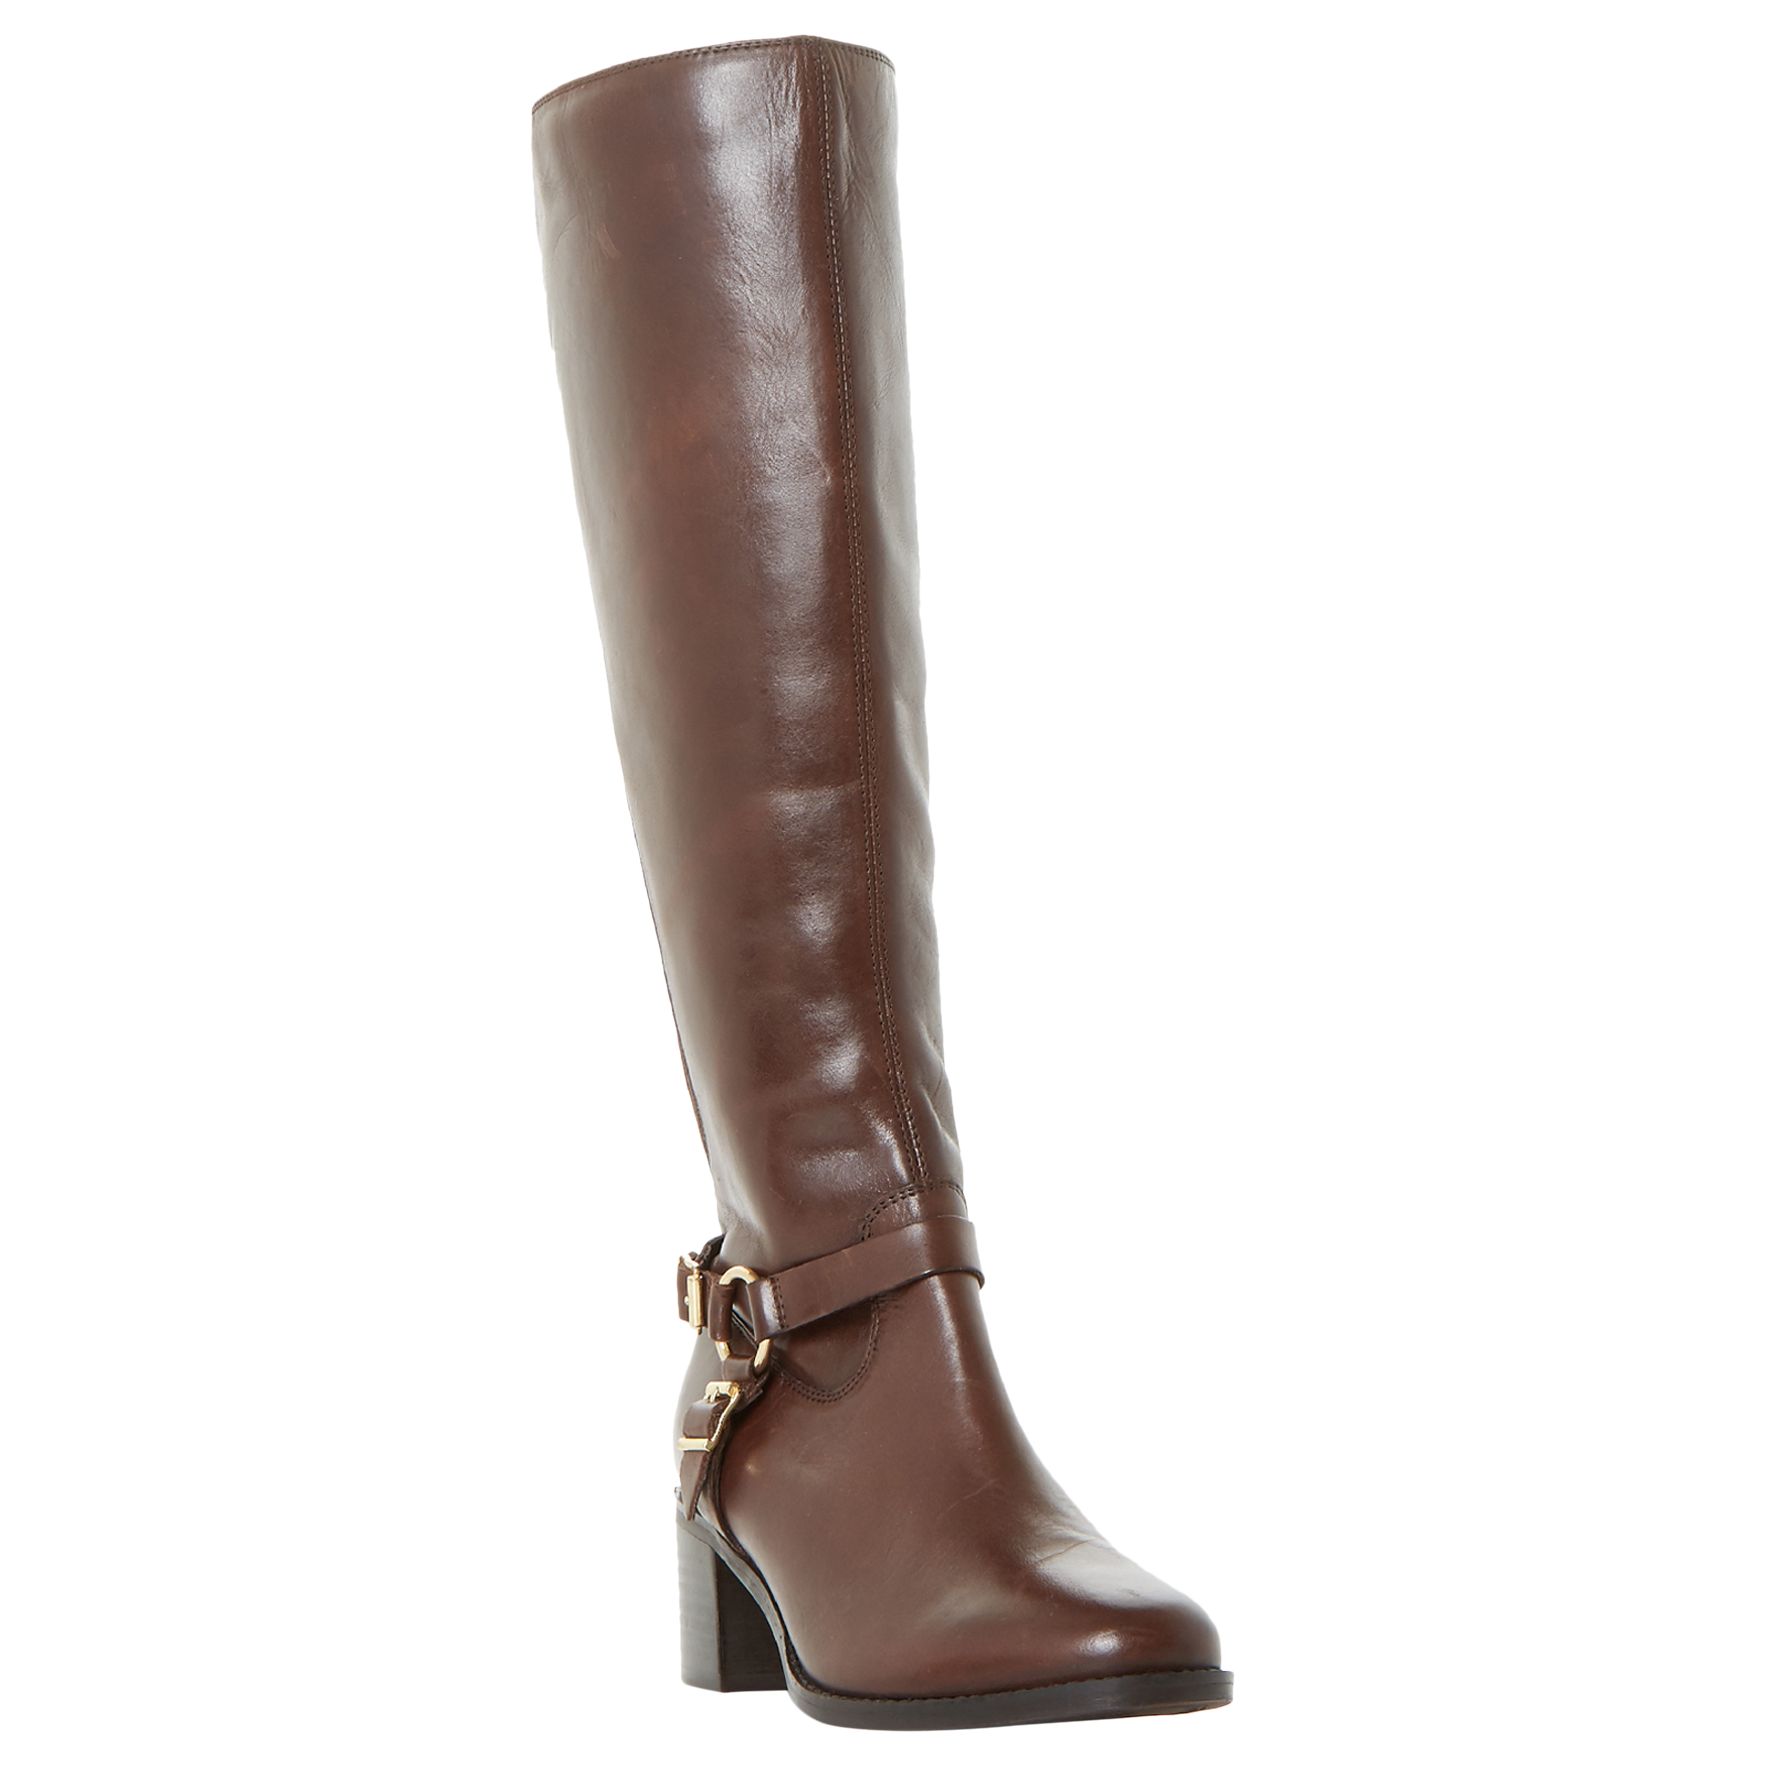 Dune Vicky Block Heeled Knee High Boots, Brown, 8